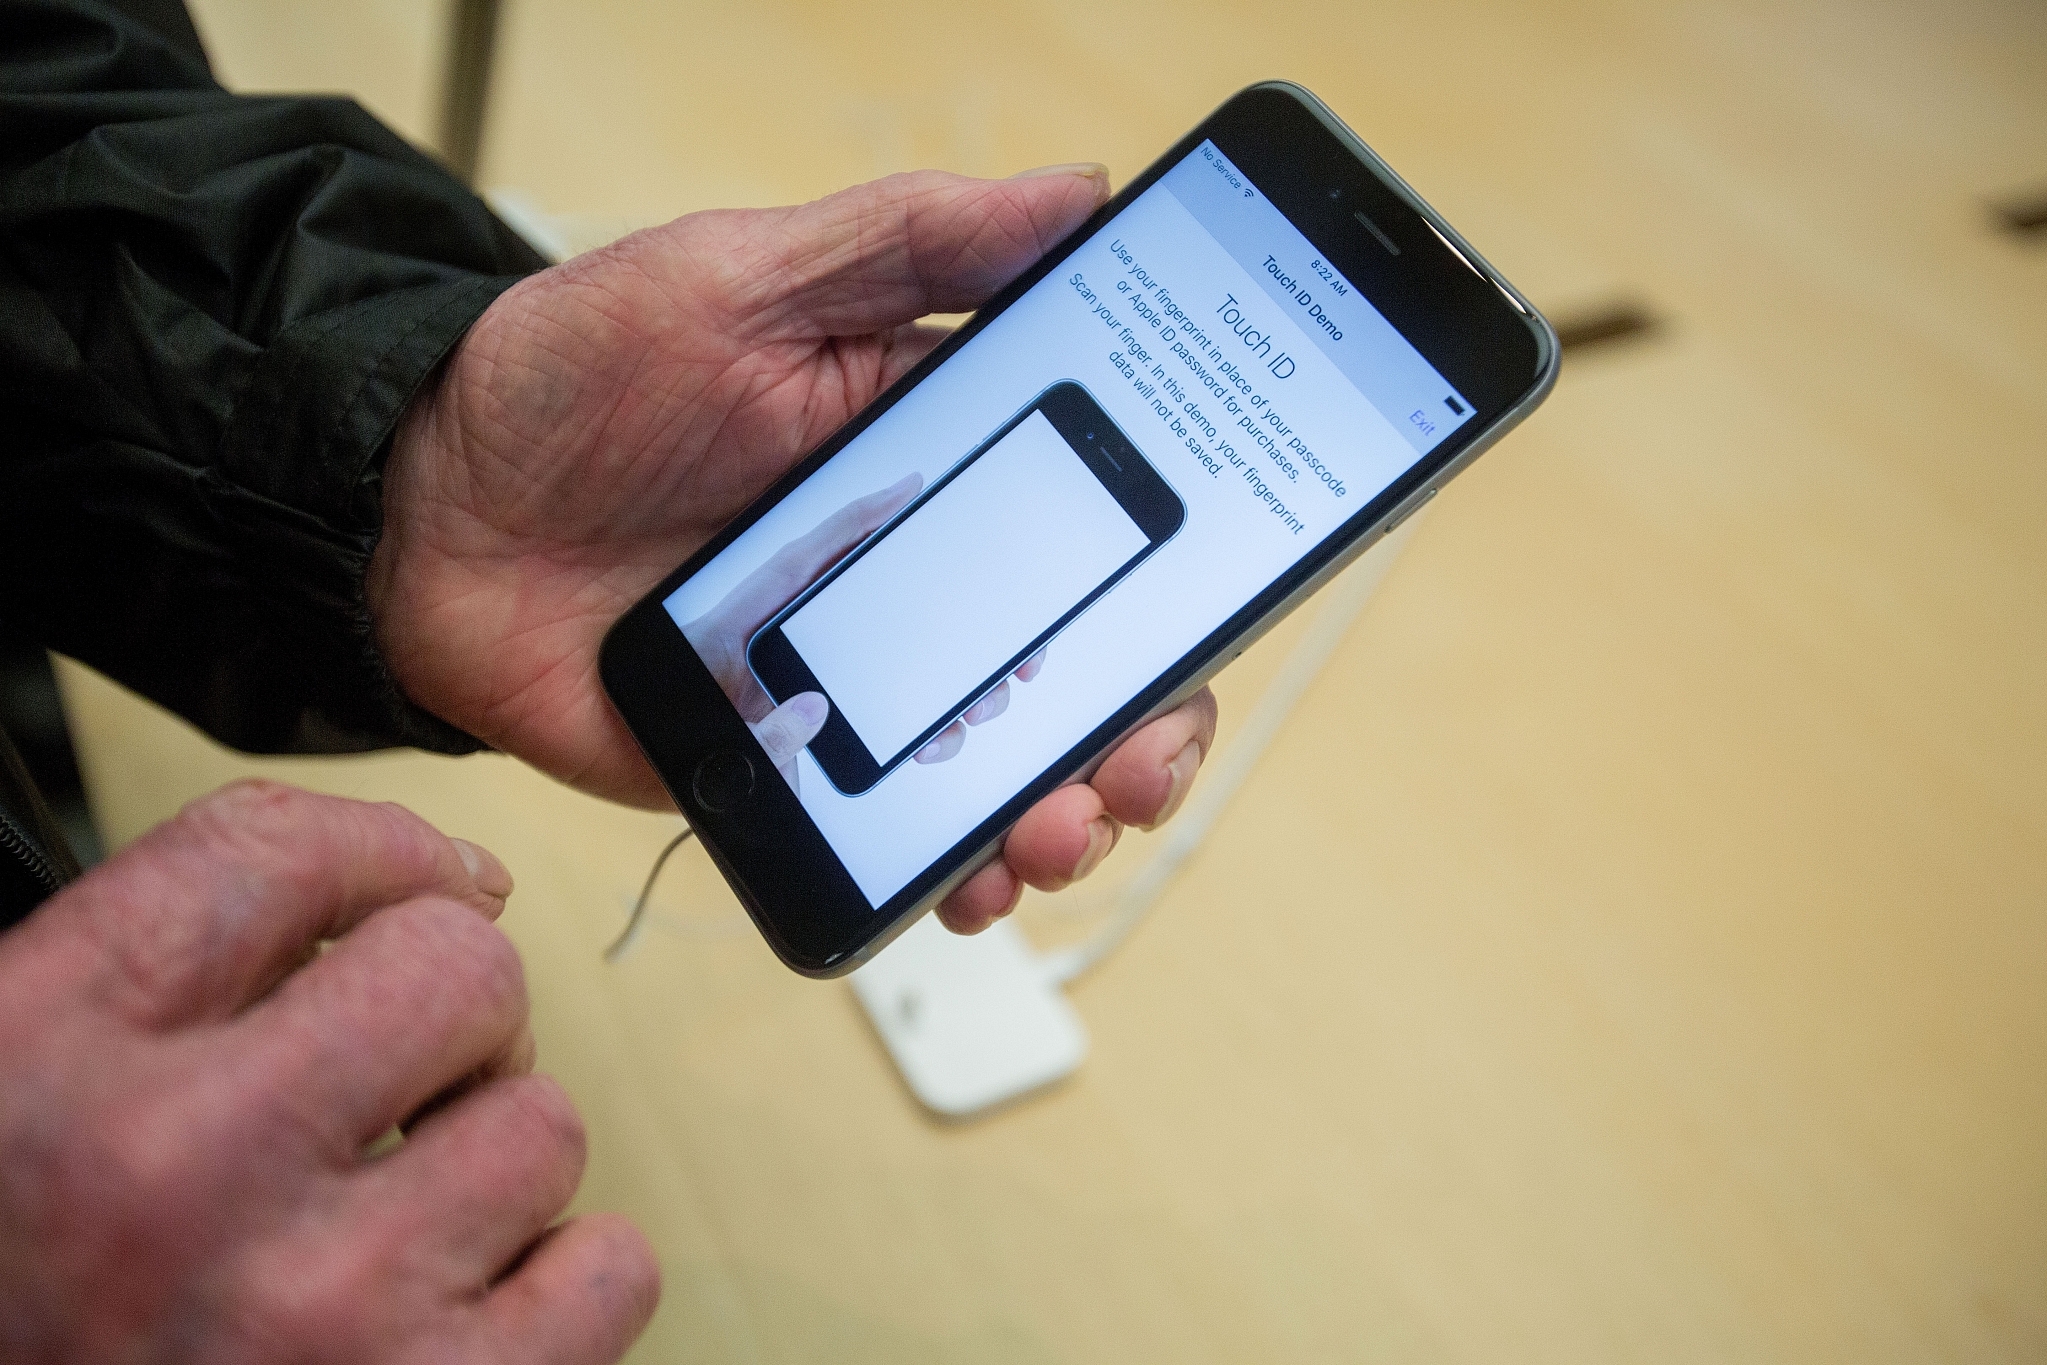 A man plays with the iPhone 6s Plus at an Apple Store (Representative Image) (Cole Bennetts/Getty Images)